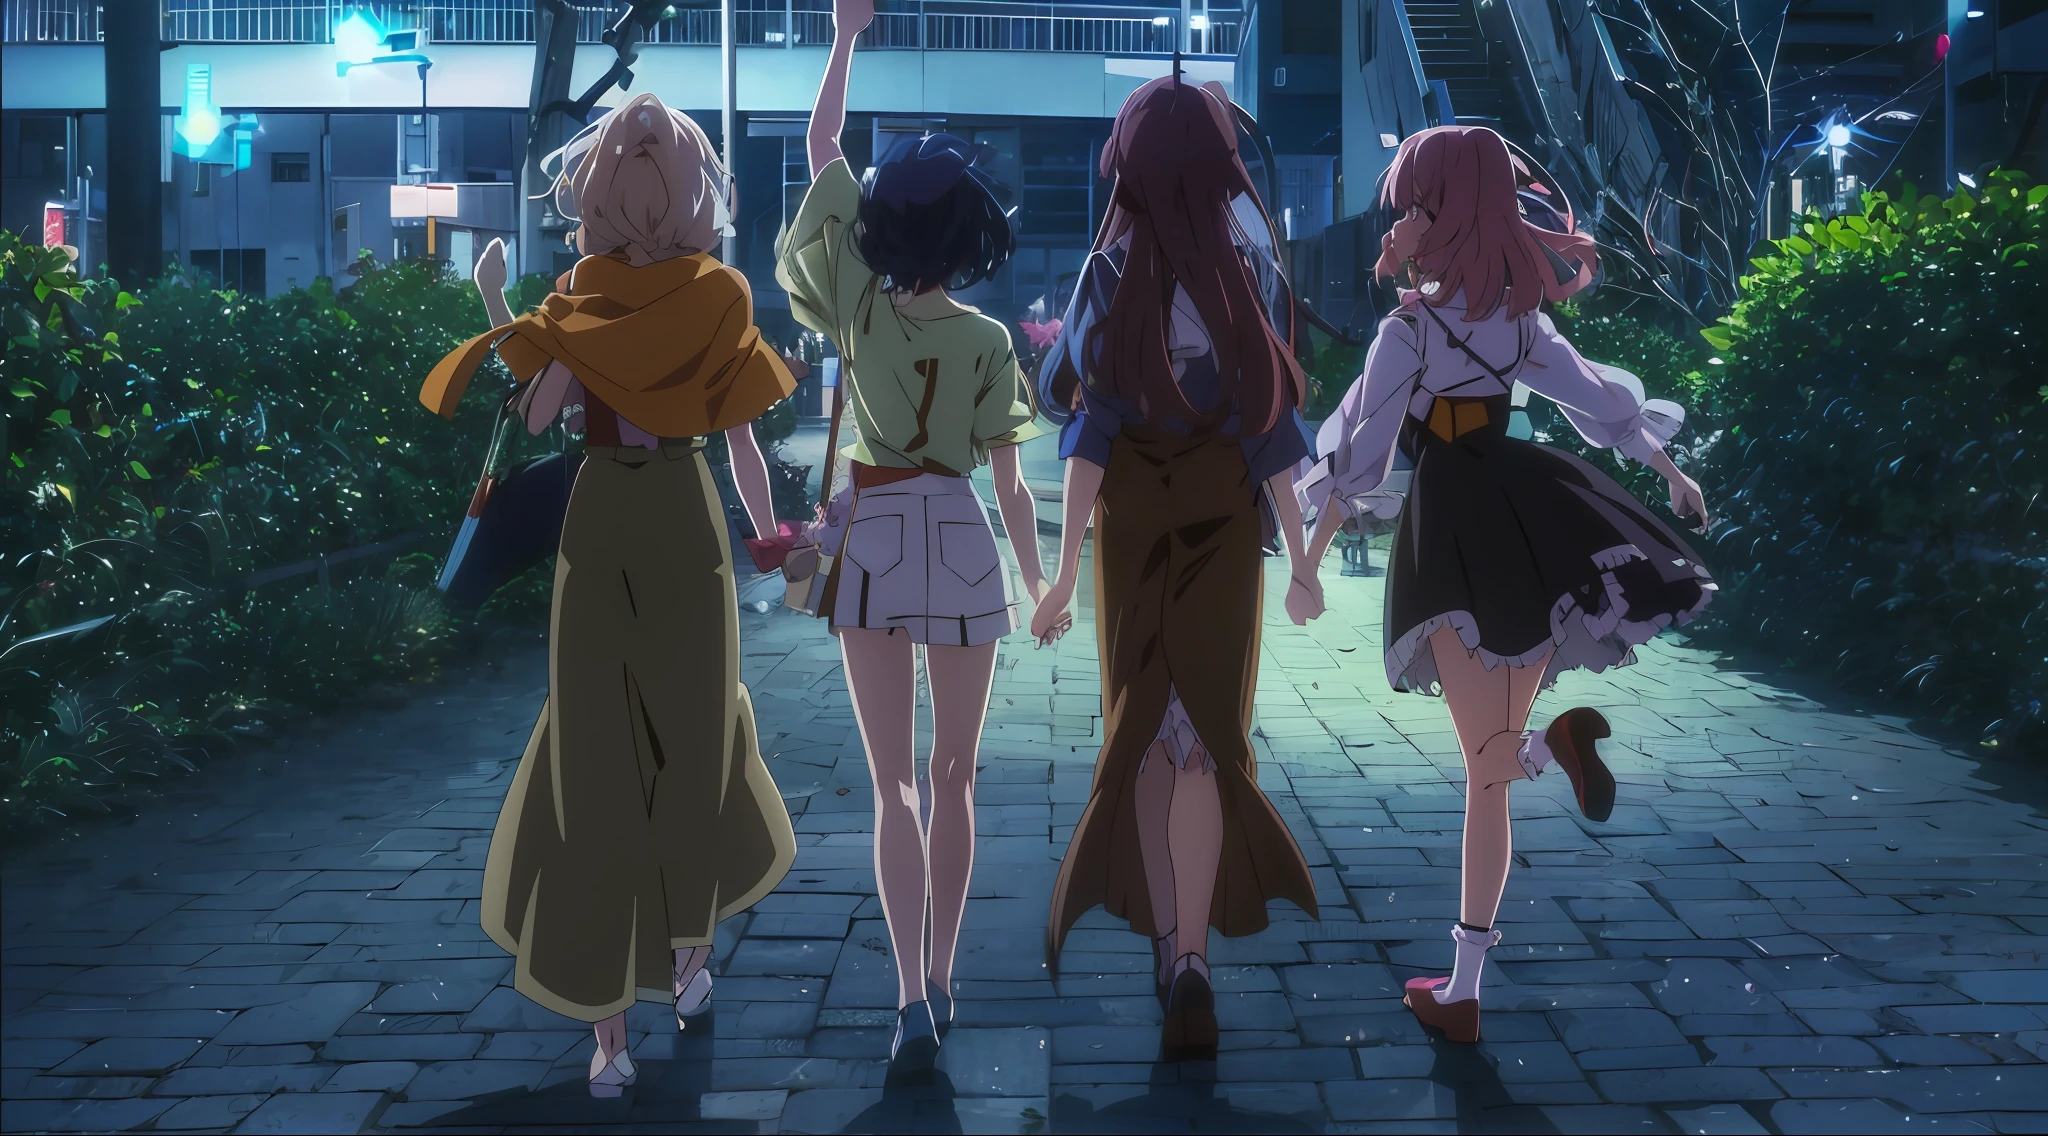 three girls walking down a sidewalk at night with umbrellas, kyoto animation still, screenshot from the anime film, anime film still, in style of kyoto animation, anime movie screenshot, still from tv anime, Today's featured anime stills, 2 0 1 9 anime screenshot, animated still, screenshot from guro anime, in the anime film, official studio anime still